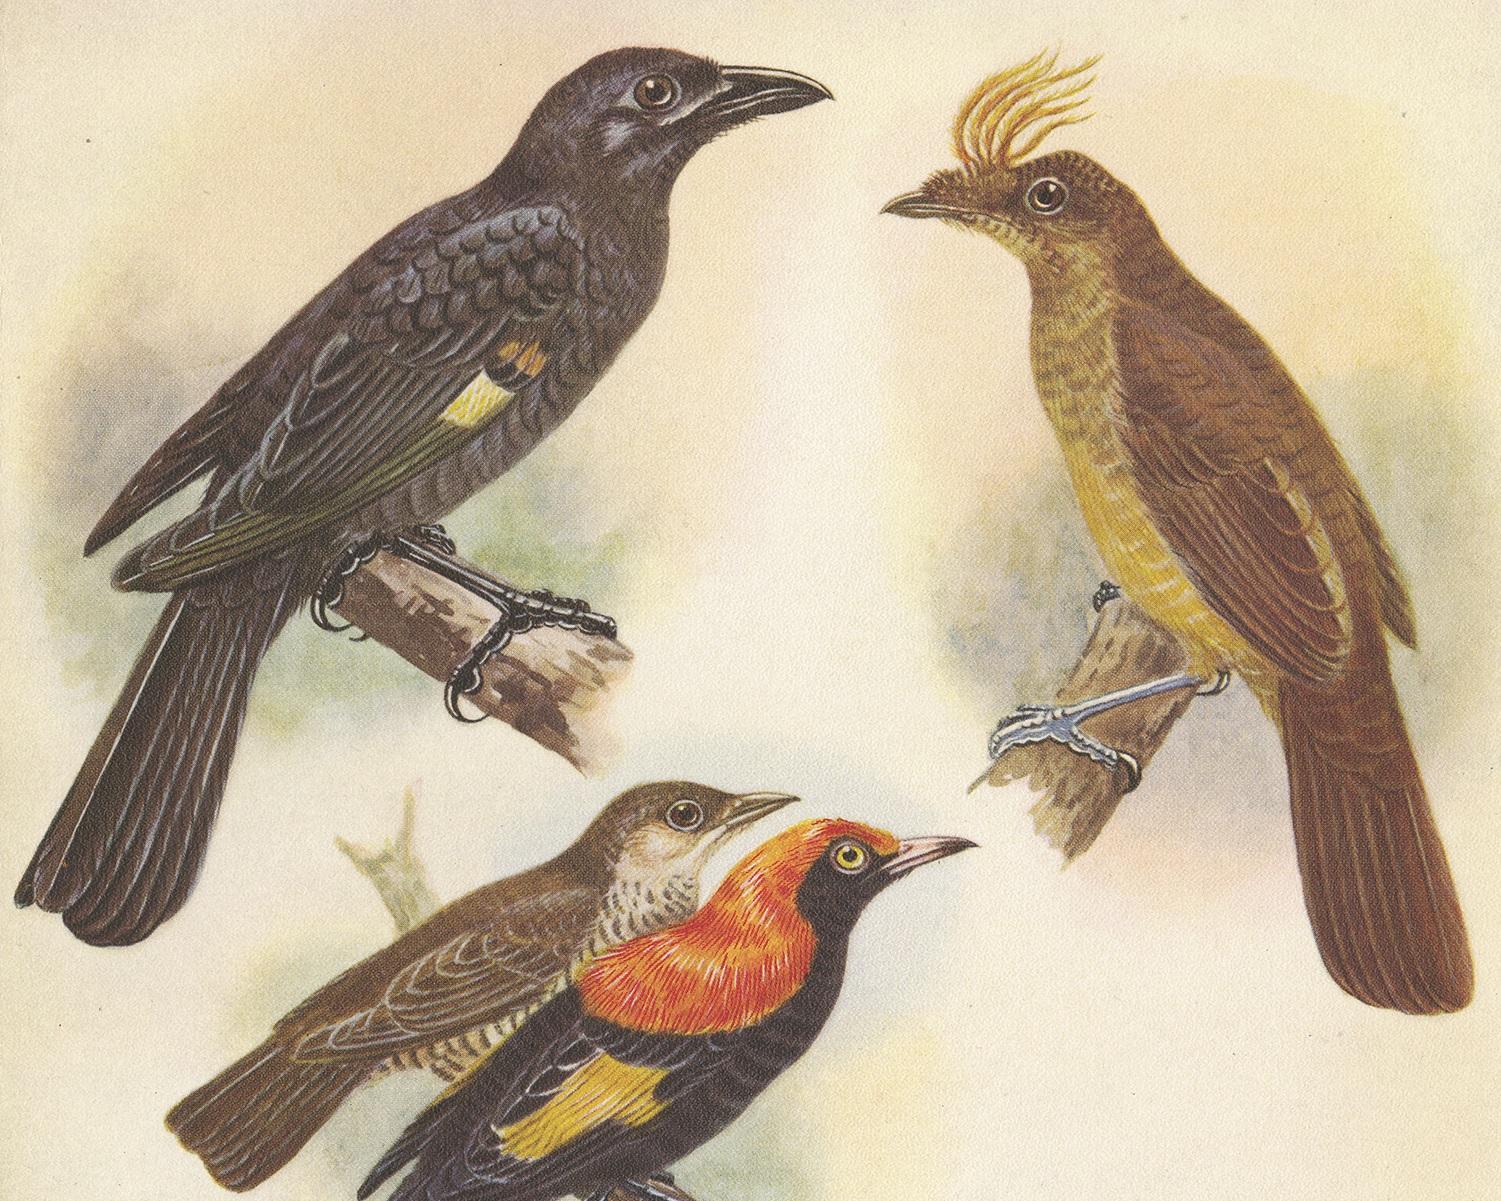 Decorative print illustrating the Archbold's bower-bird, crested golden bird, Madang golden bird and Lauterbachs bower bird. This authentic print originates from 'birds of paradise and bower birds' by Tom Iredale. With colored illustrations of every